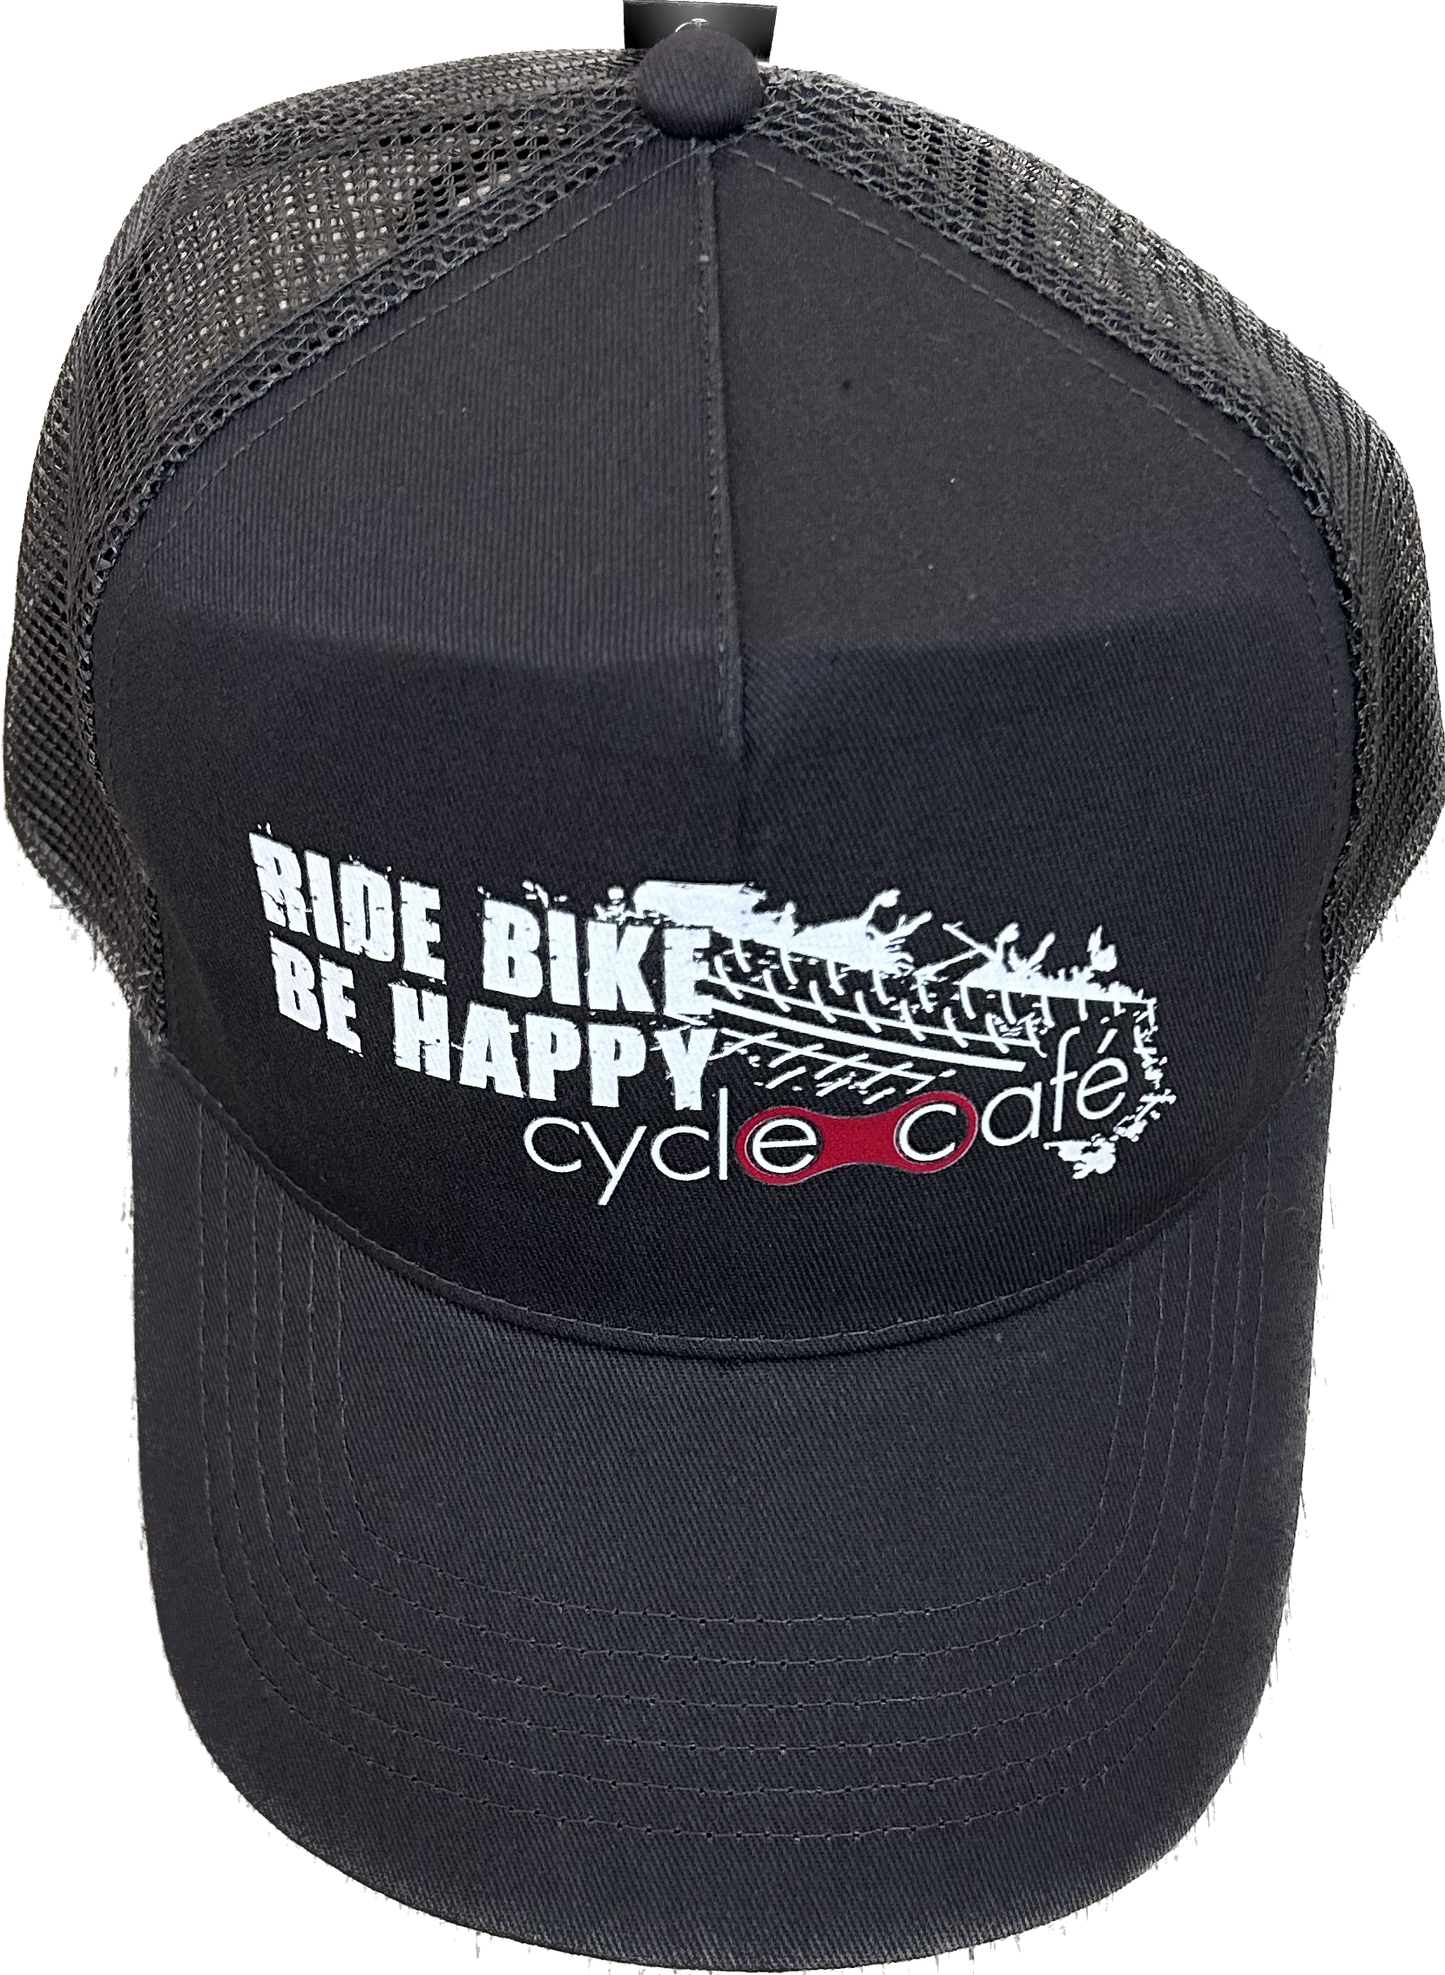 Cappellino Cycle Café tg. unica - RIDE BIKE BE HAPPY - LET’S RIDE